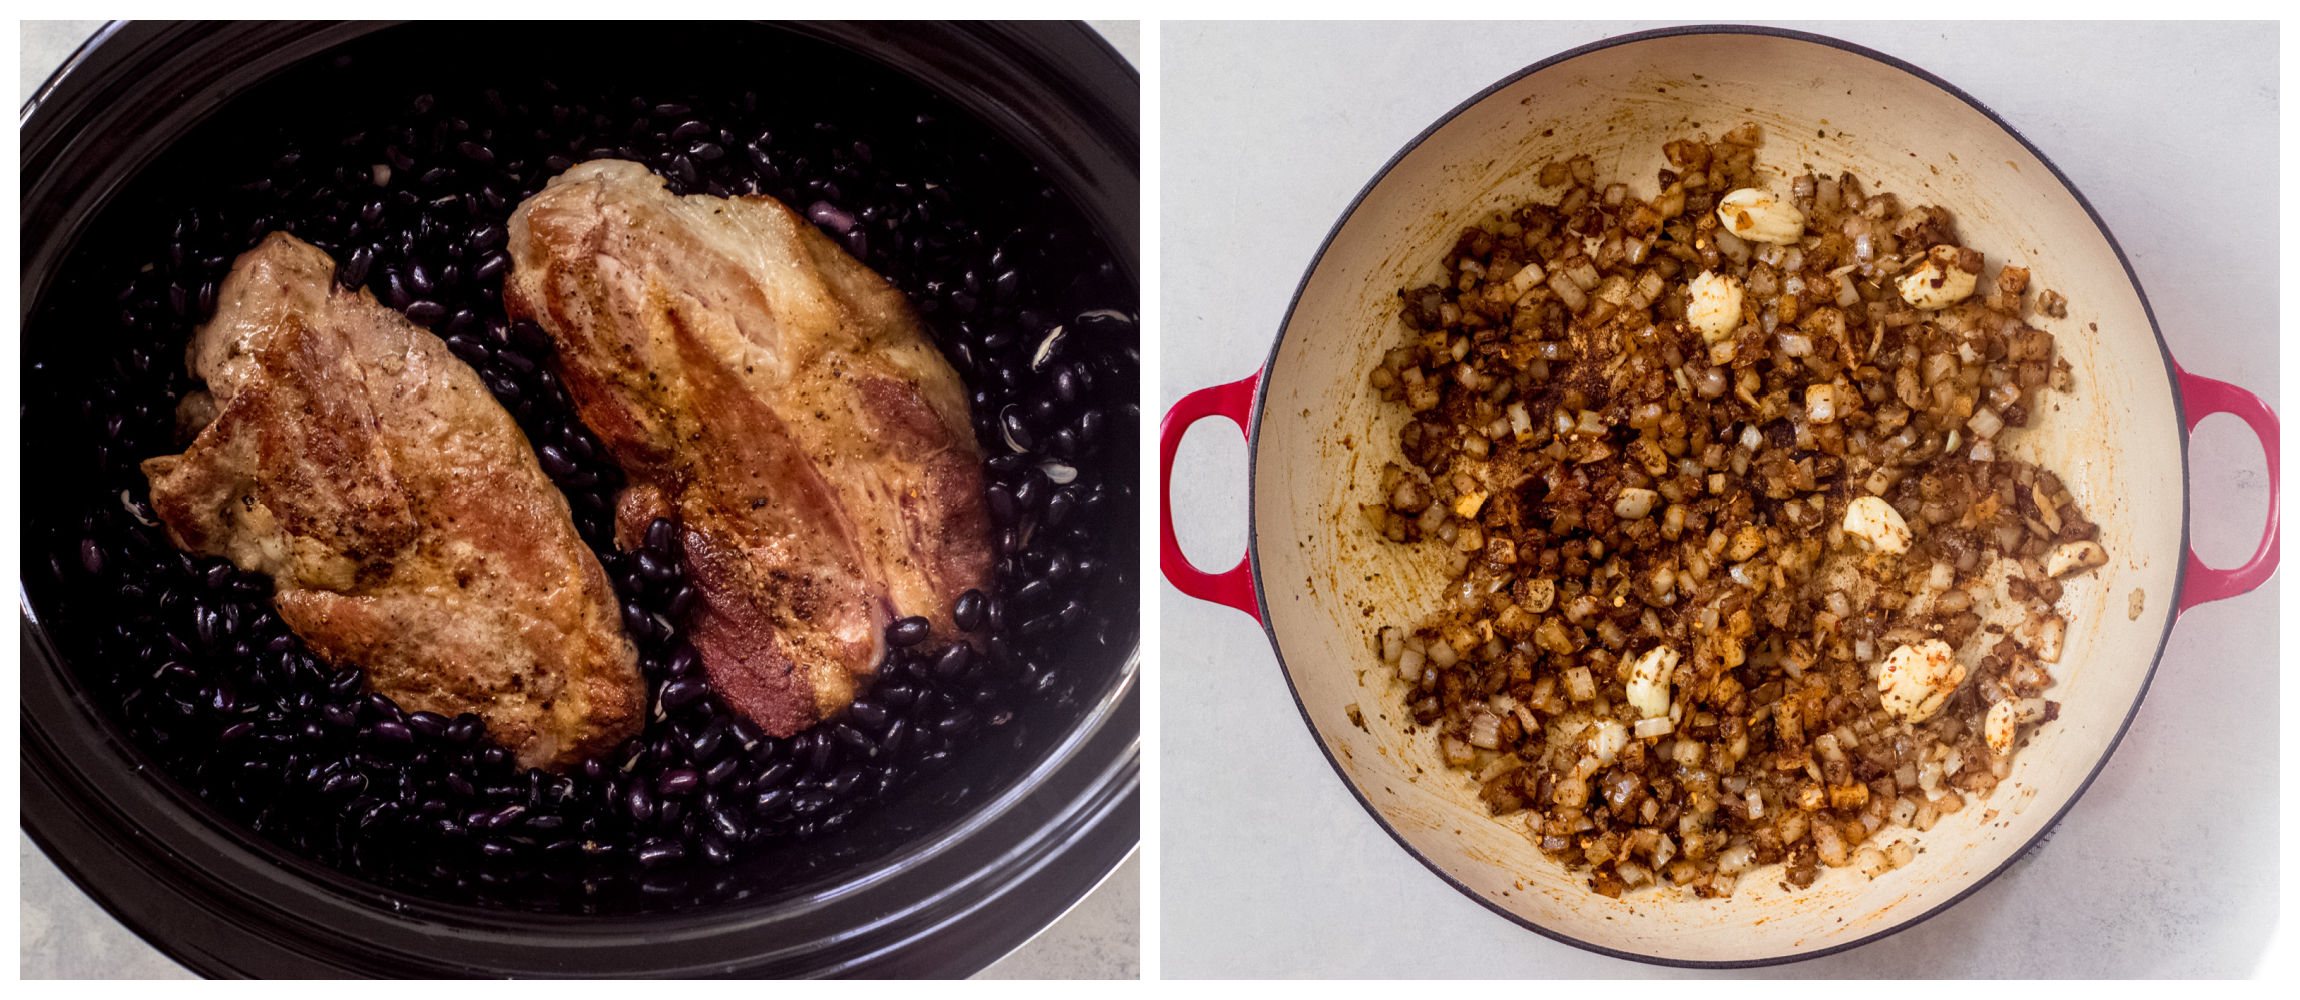 two photos showing seared pork and beans inside crockpot, and sauteed onions and garlic in skillet.